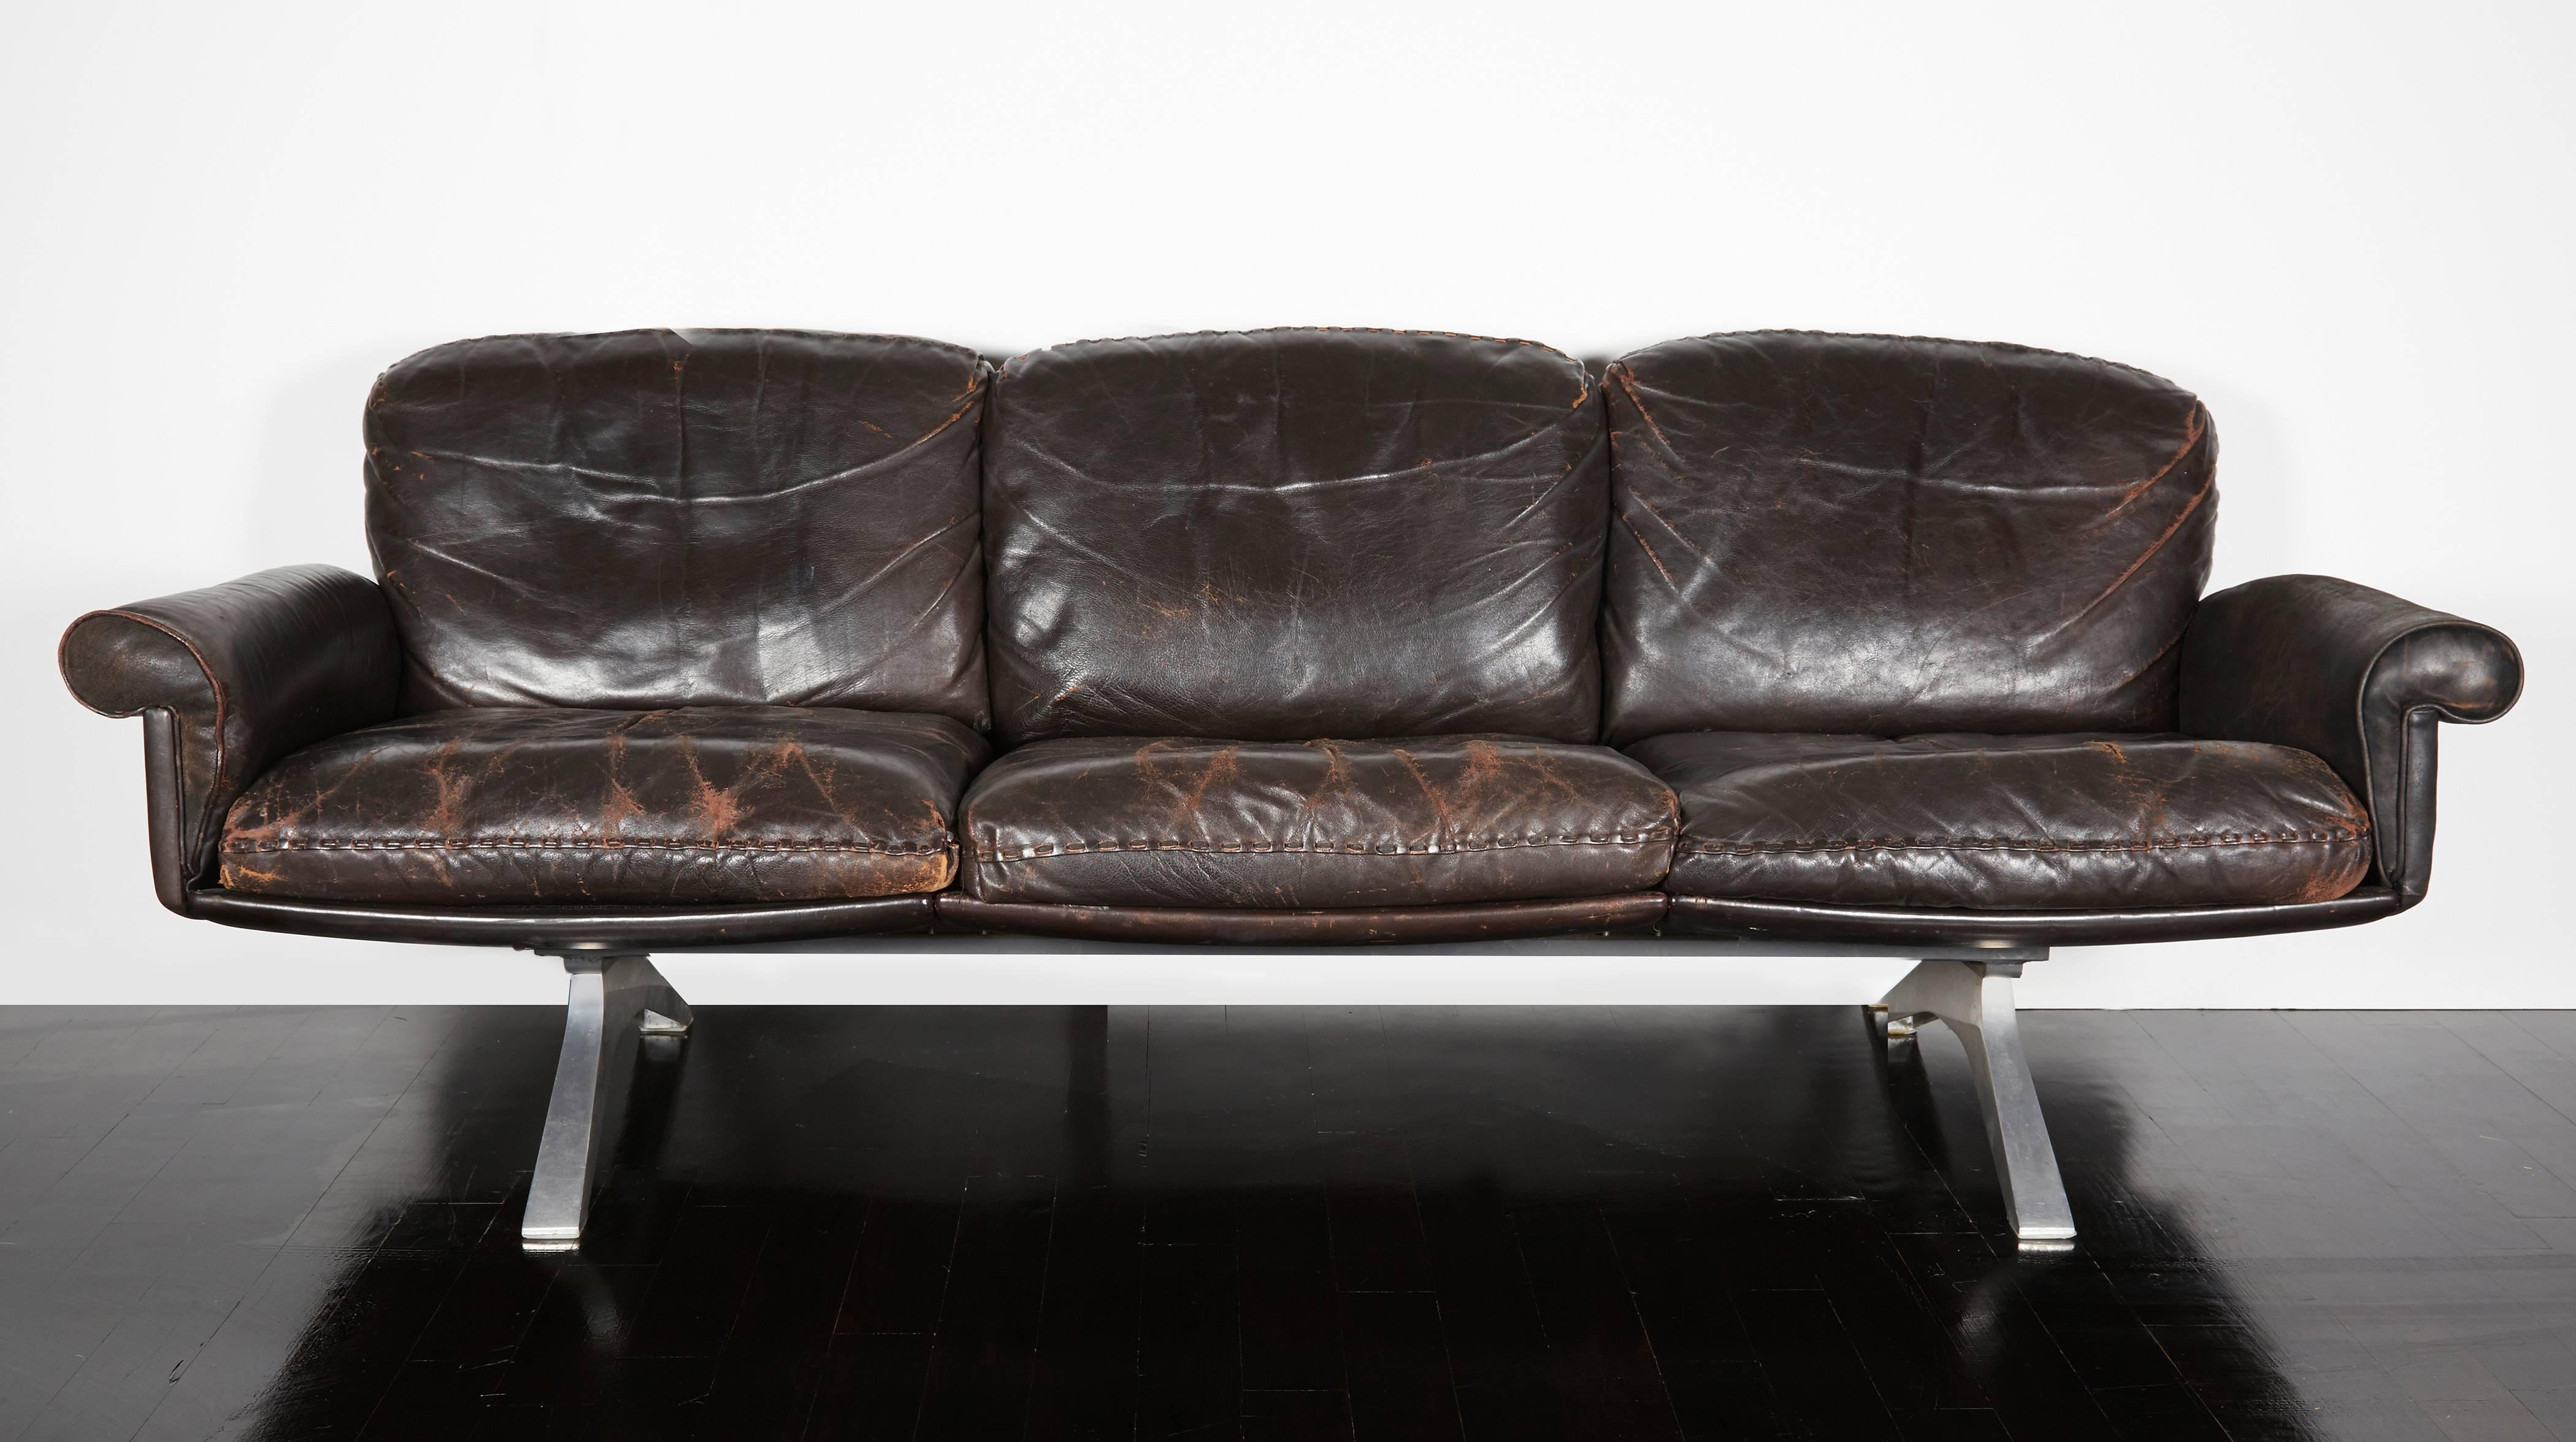 A dark brown leather sofa by DeSede with nice patina, rolled arms, six cushions with whipstich edge detail and a brushed metal base.
Excellent vintage condition.
